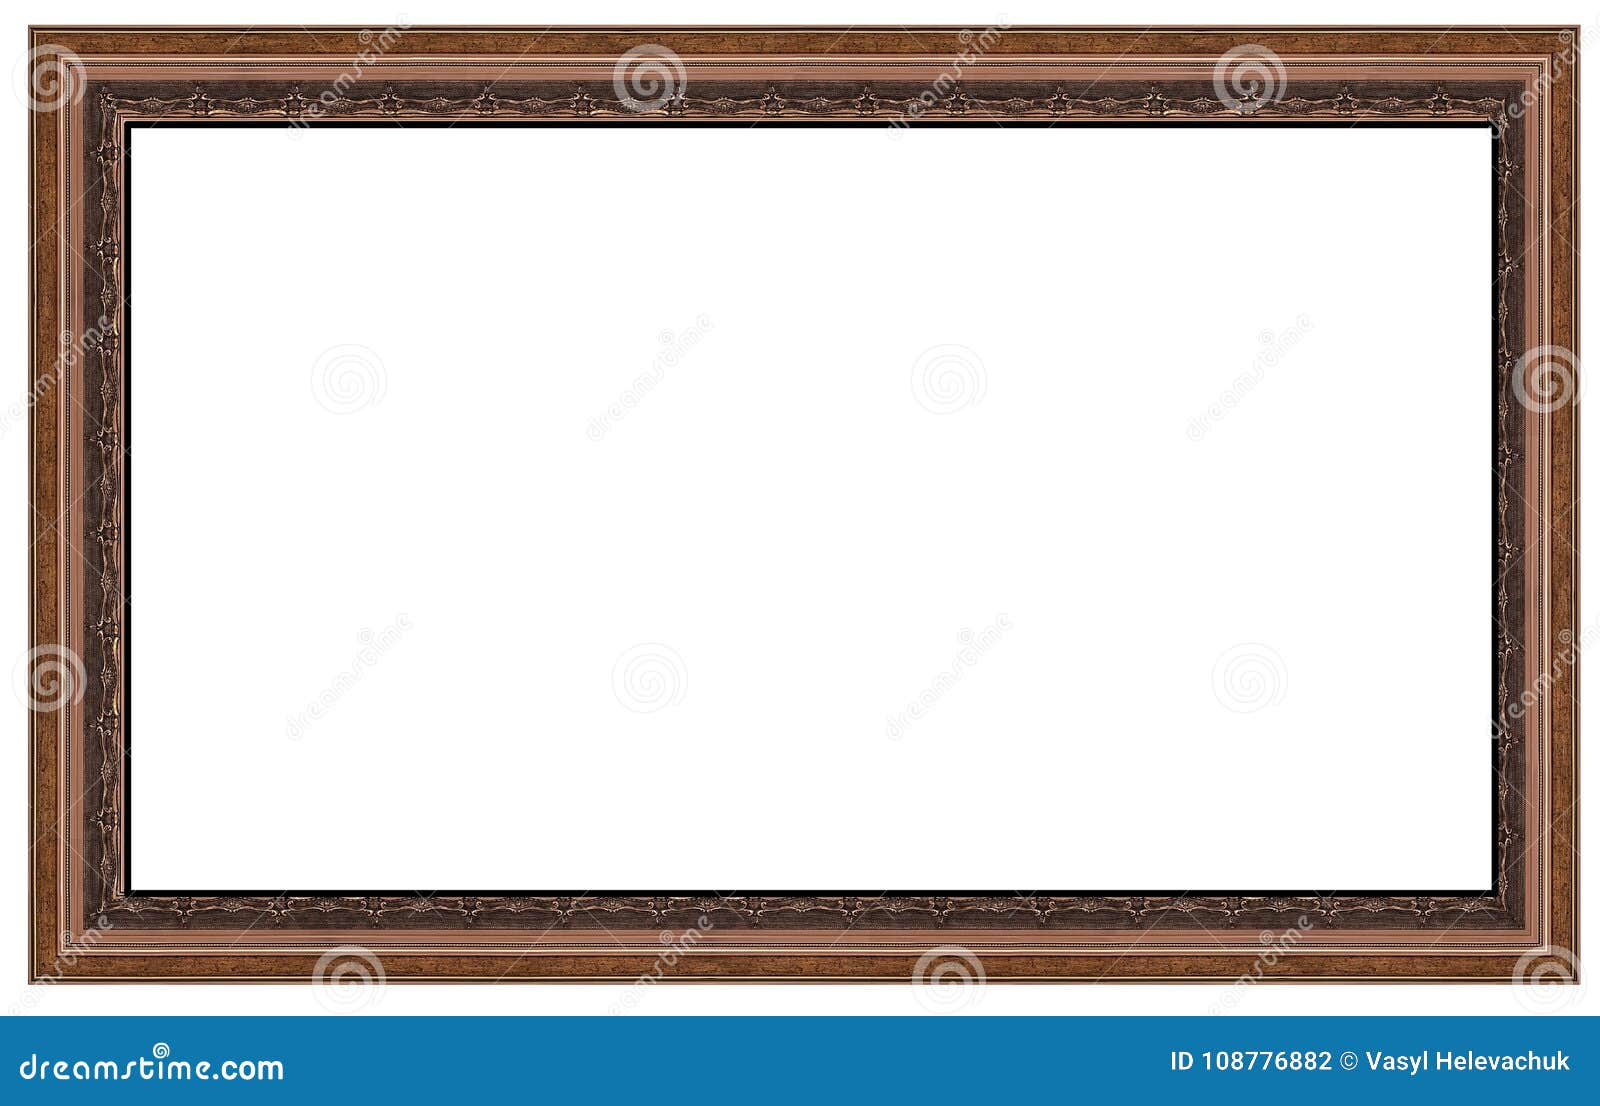 16:9 size frame brown stock photo. Image of retro, object - 108776882